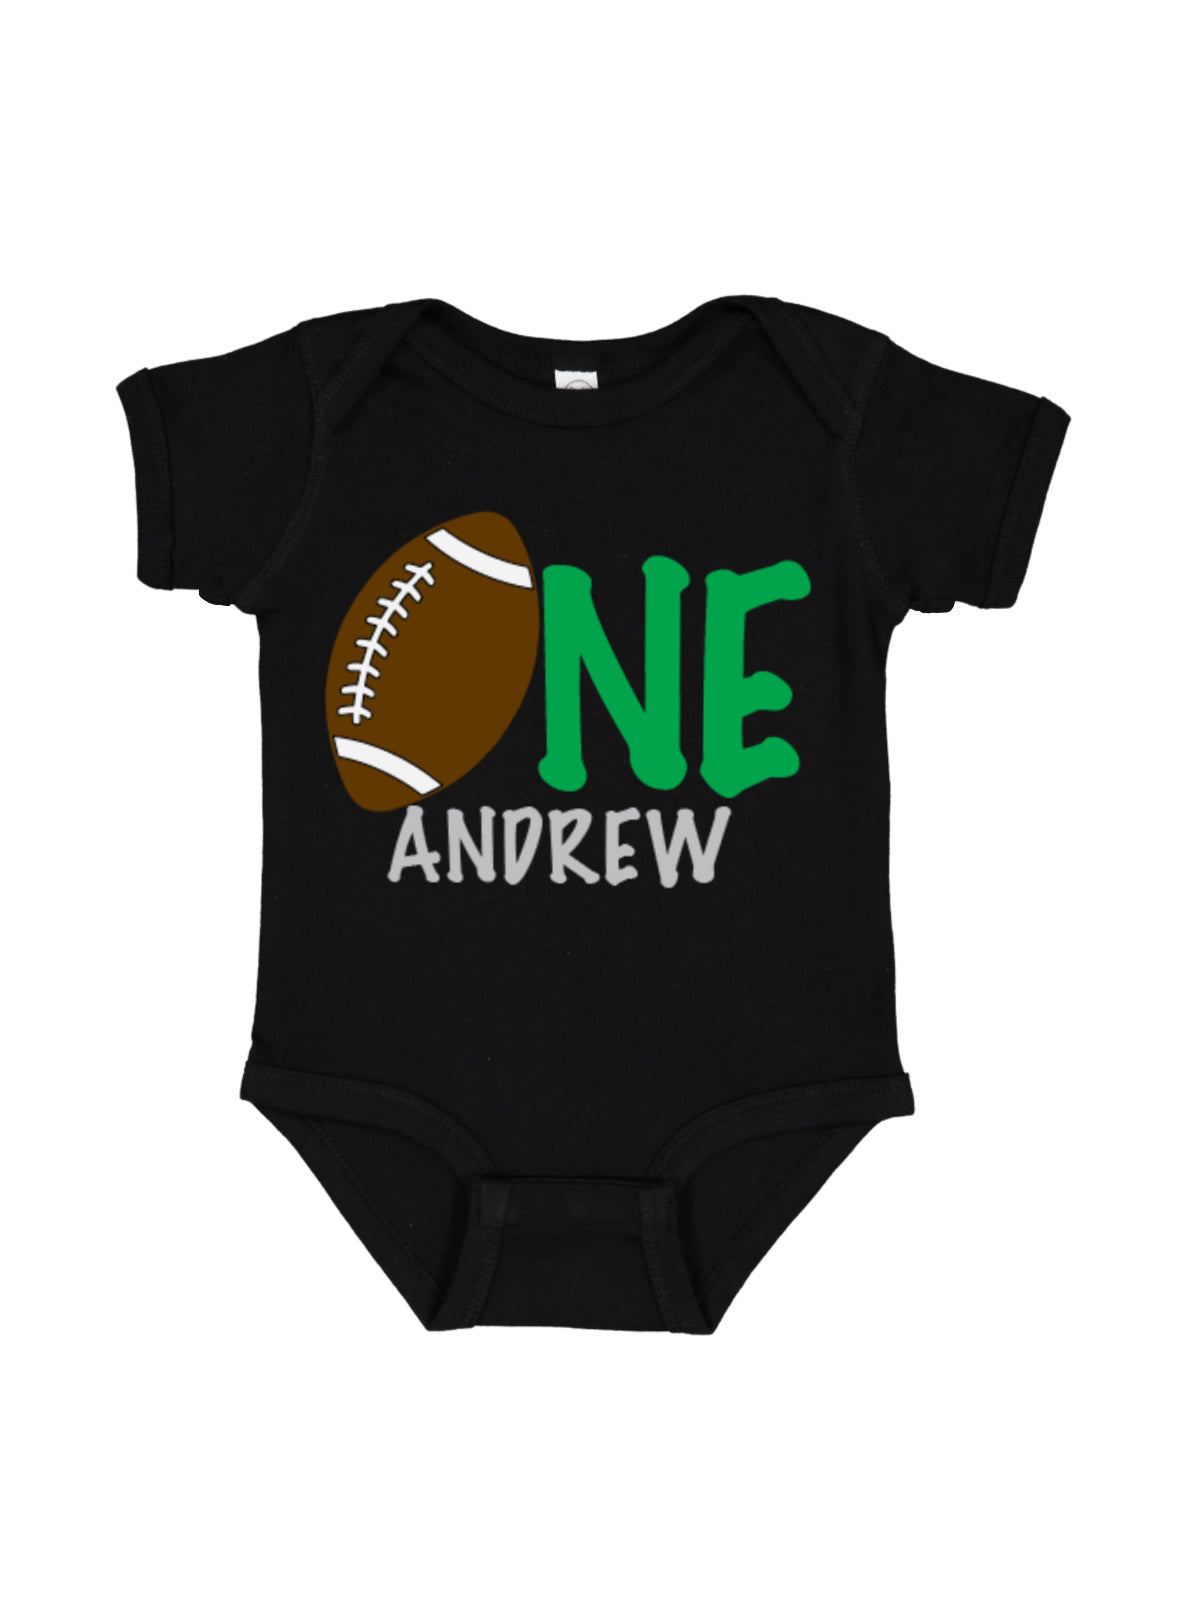 black ONE personalized football shirt for baby boy